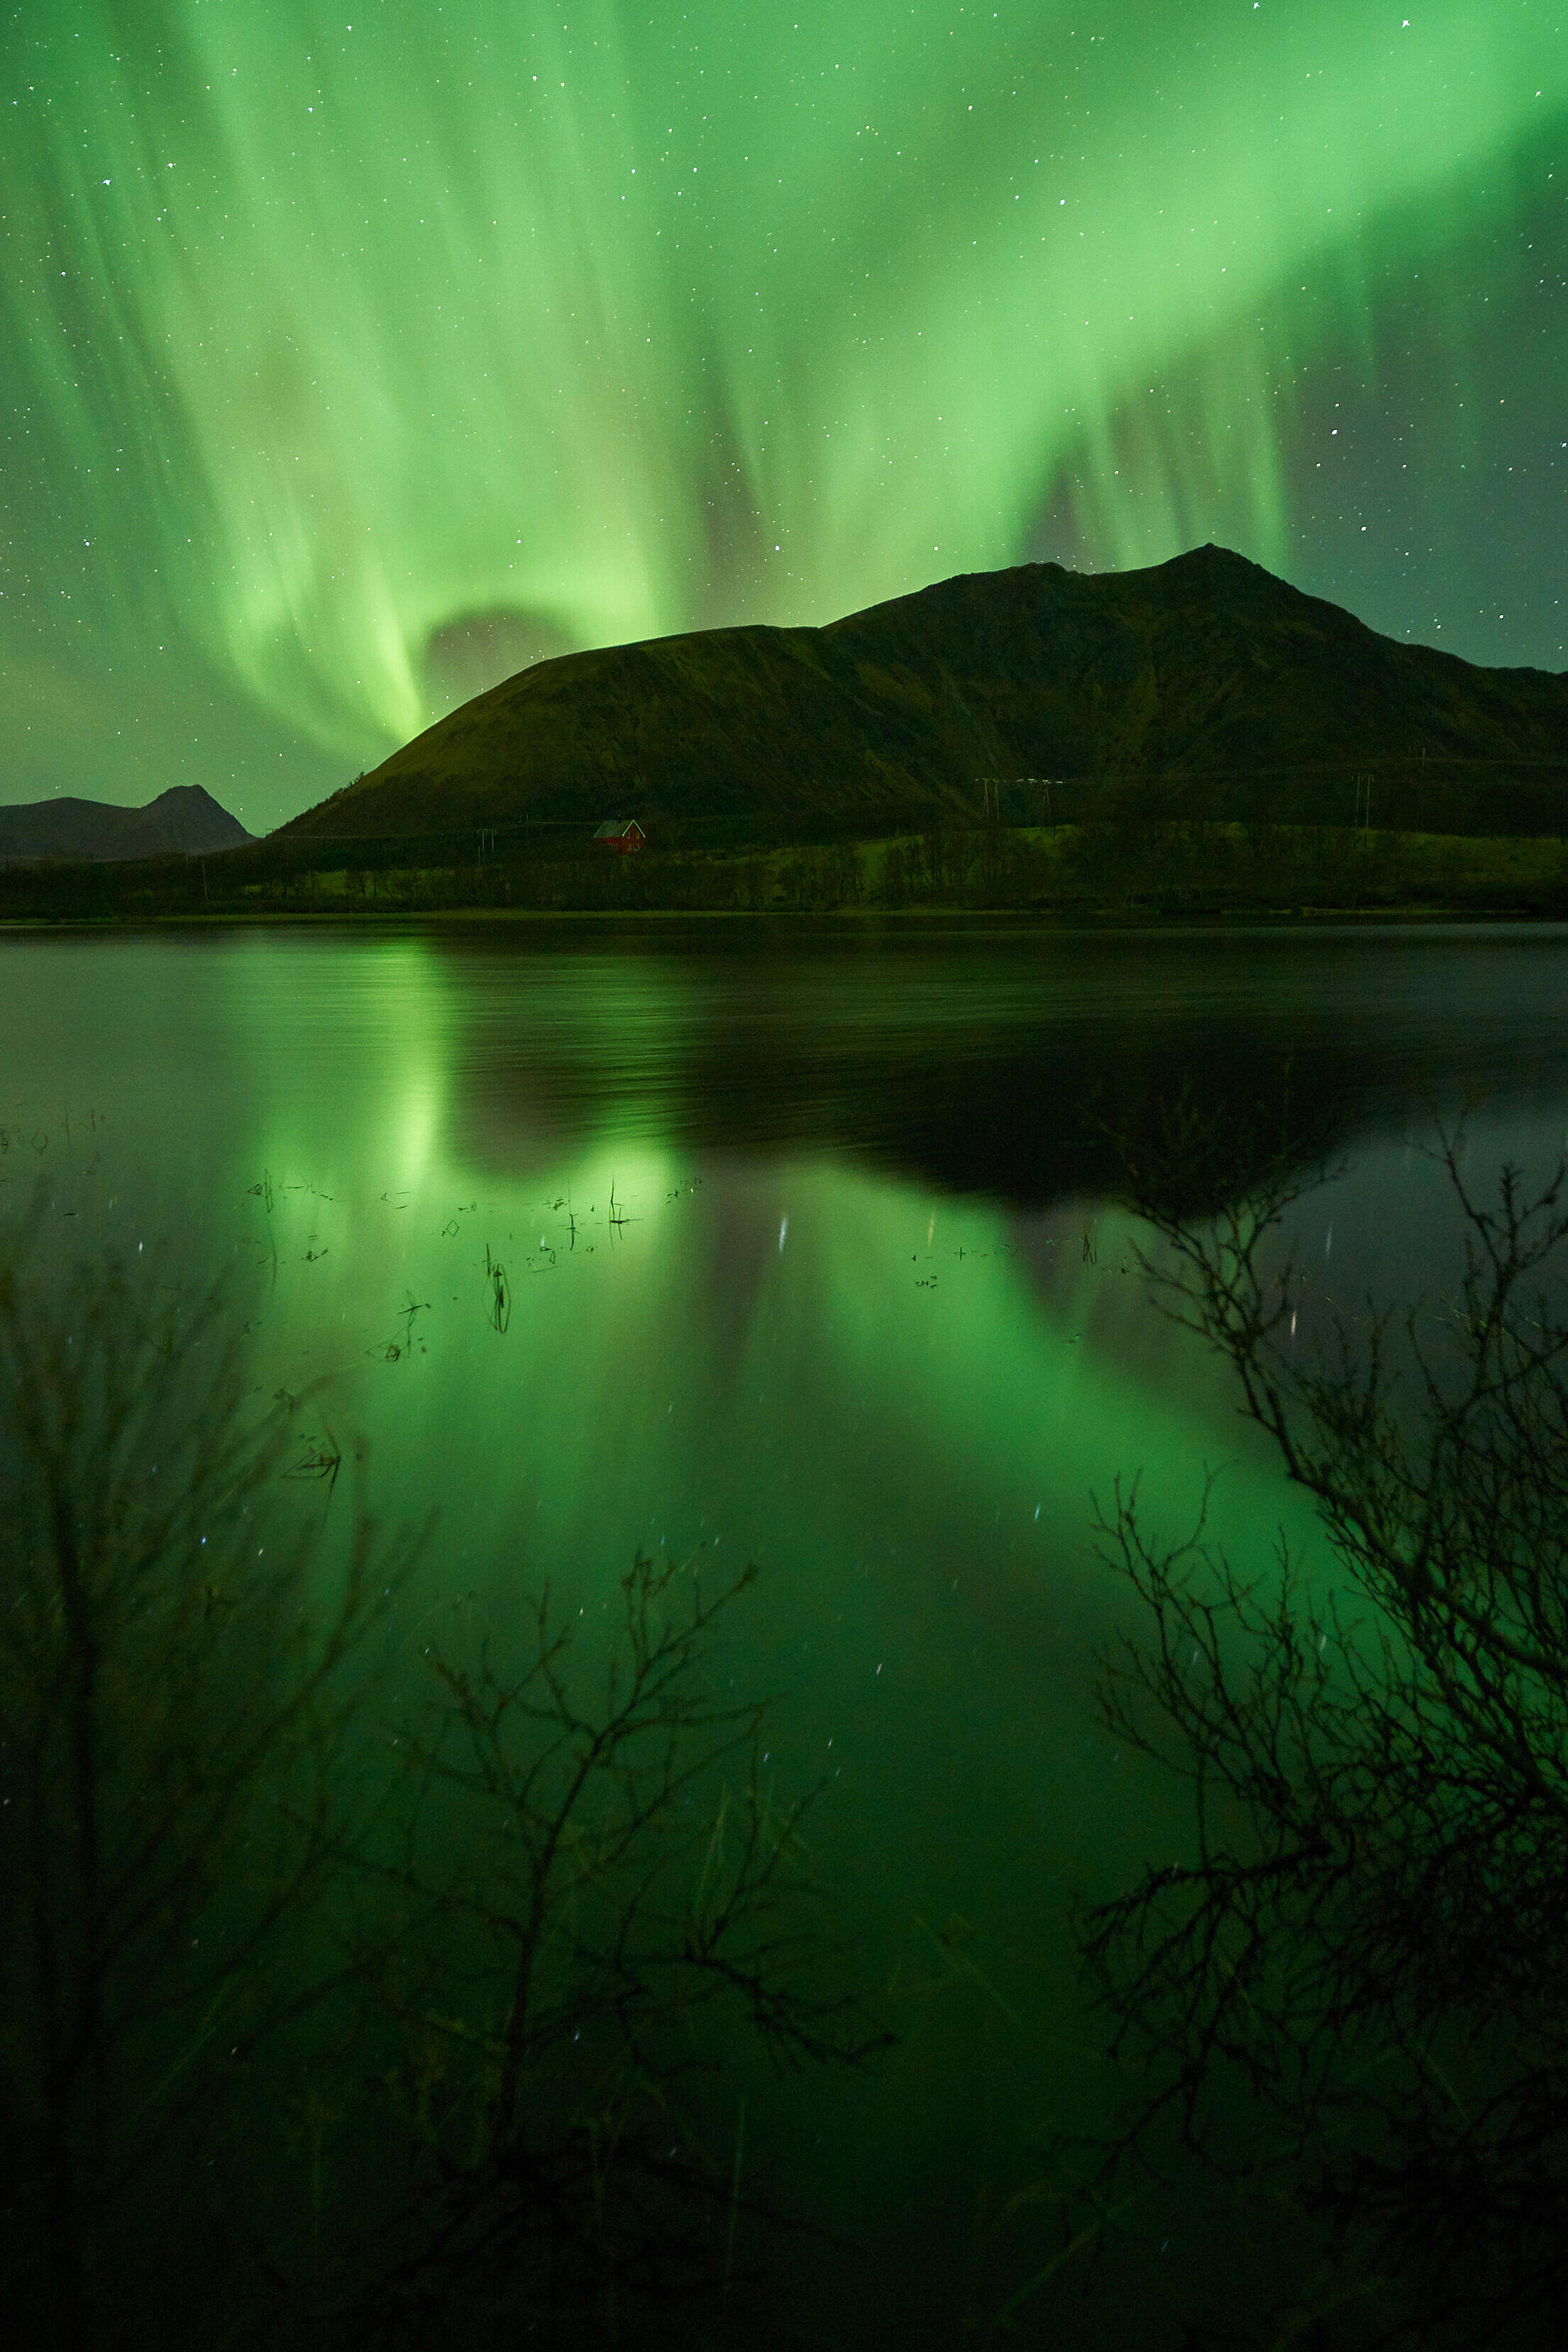 Northernlights Reflection on a Lake Free Stock Photo